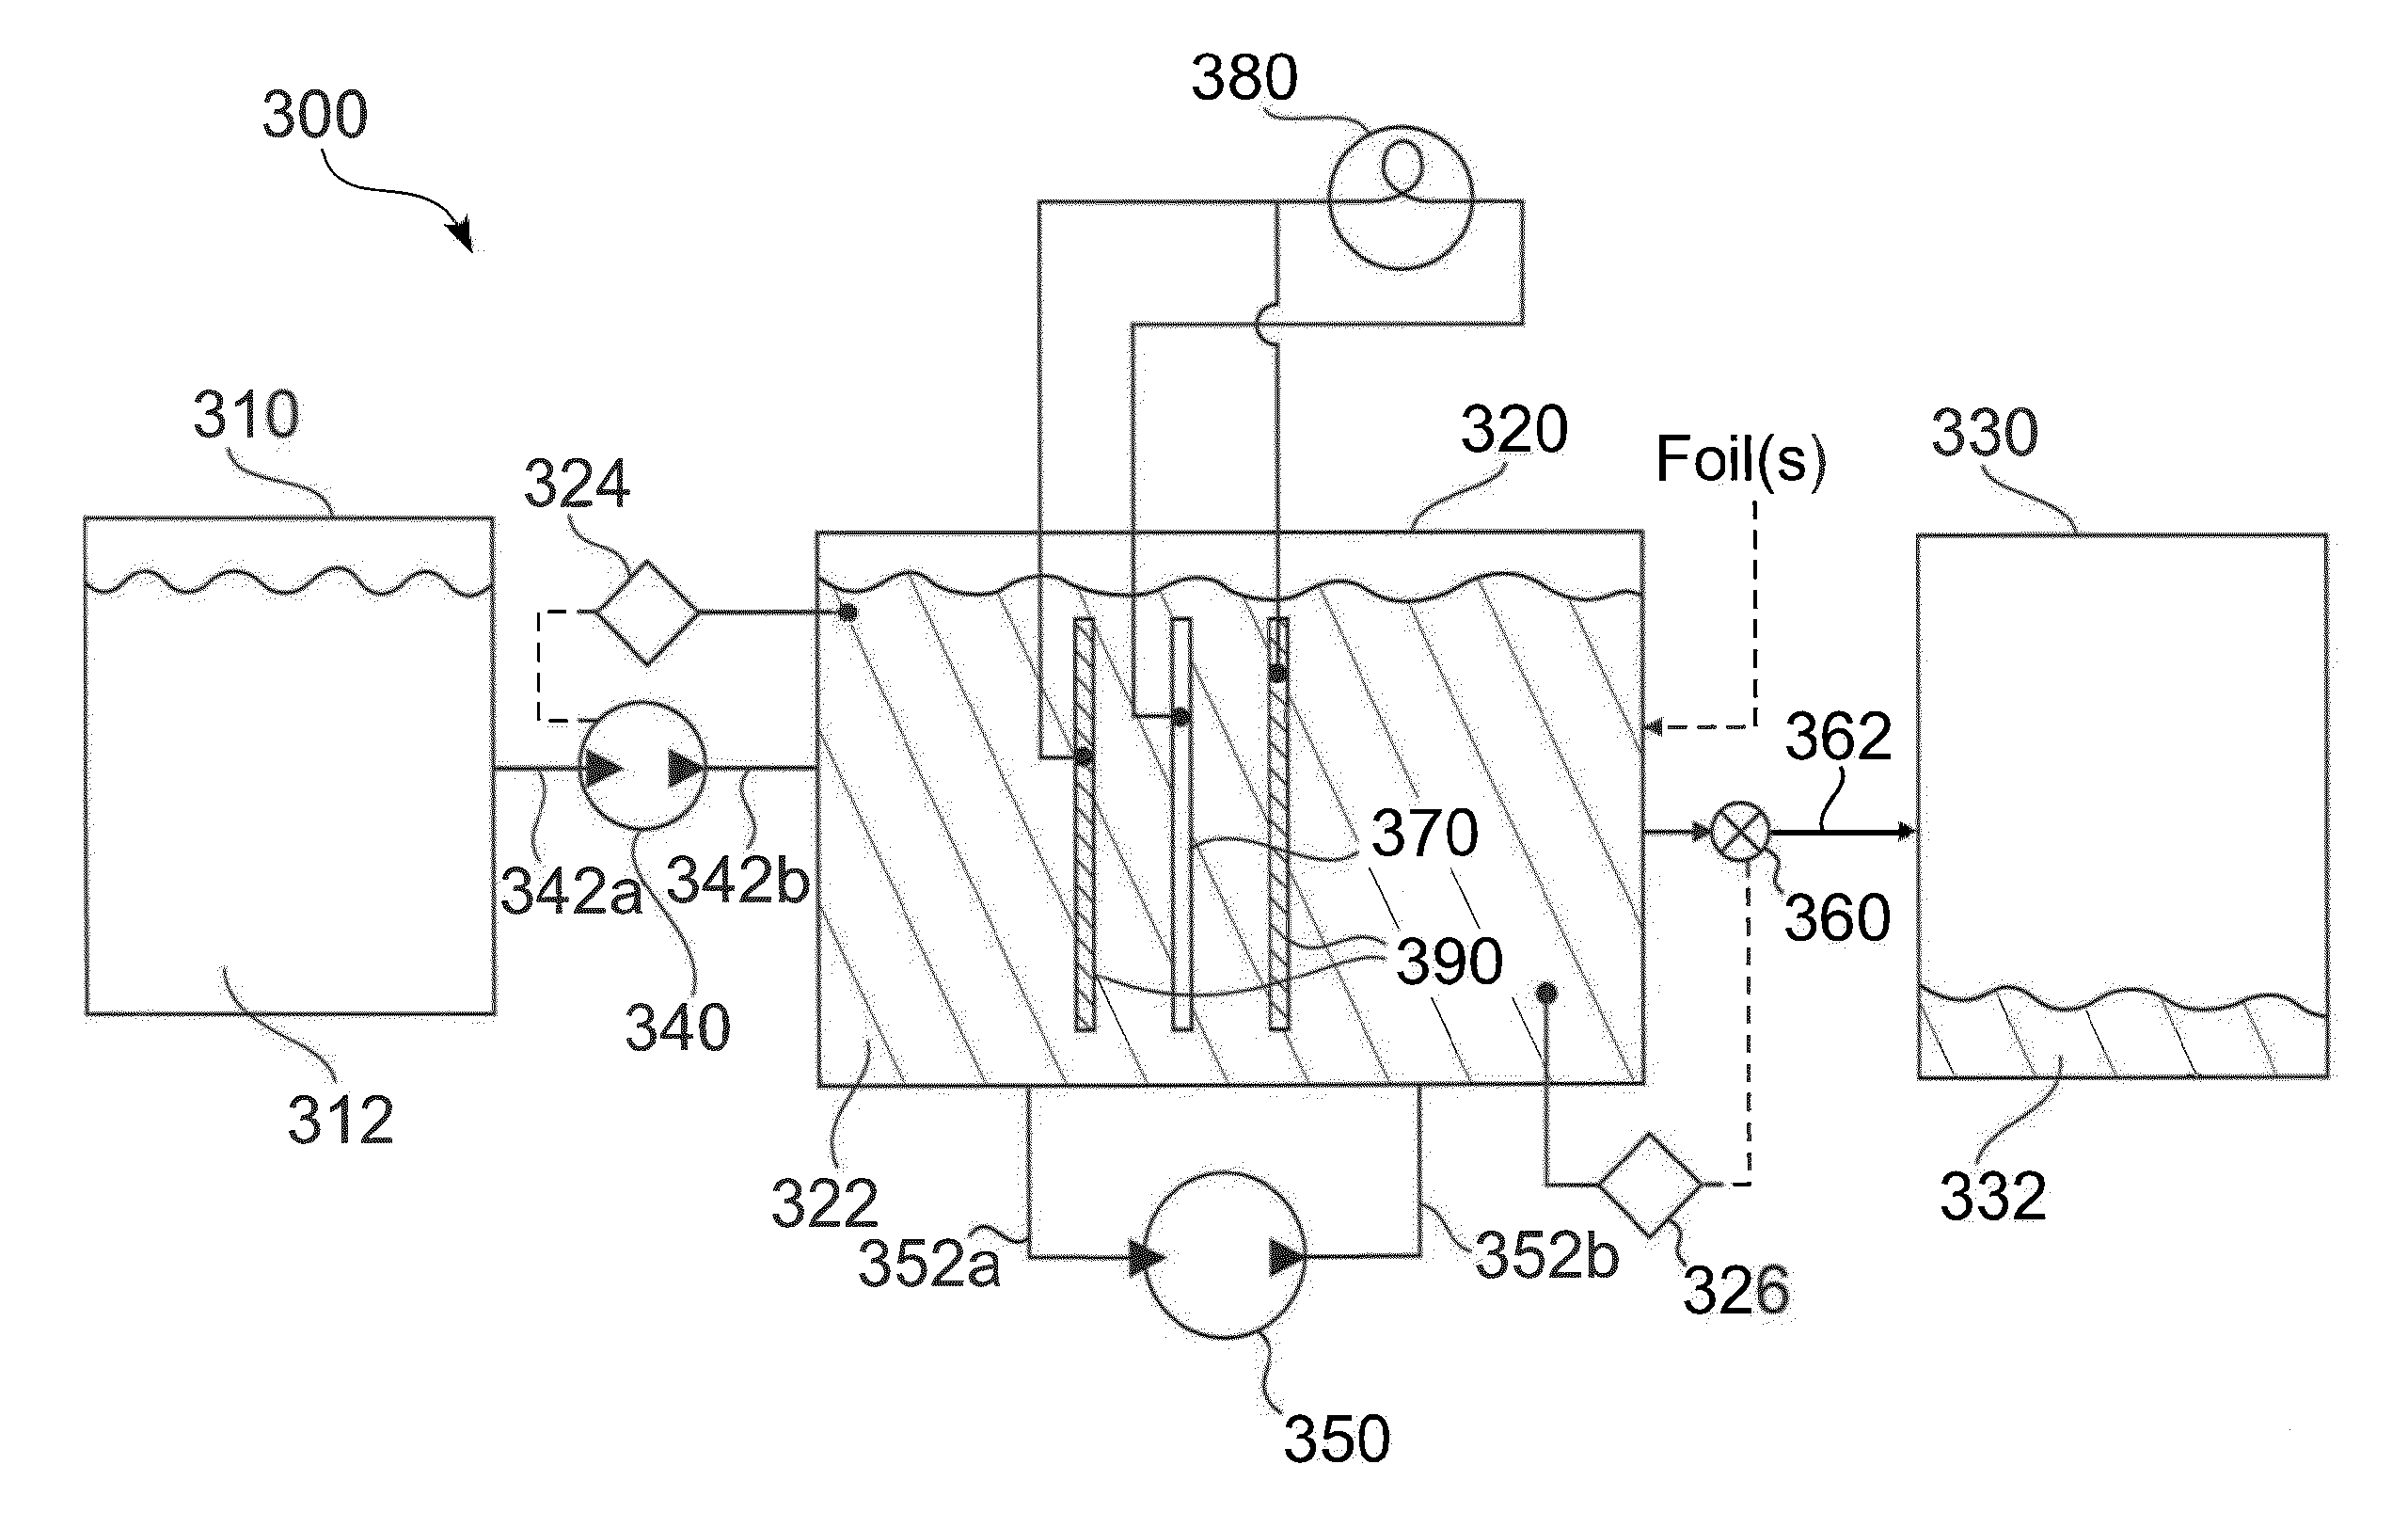 Electrochemical drilling system and process for improving electrical porosity of etched anode foil